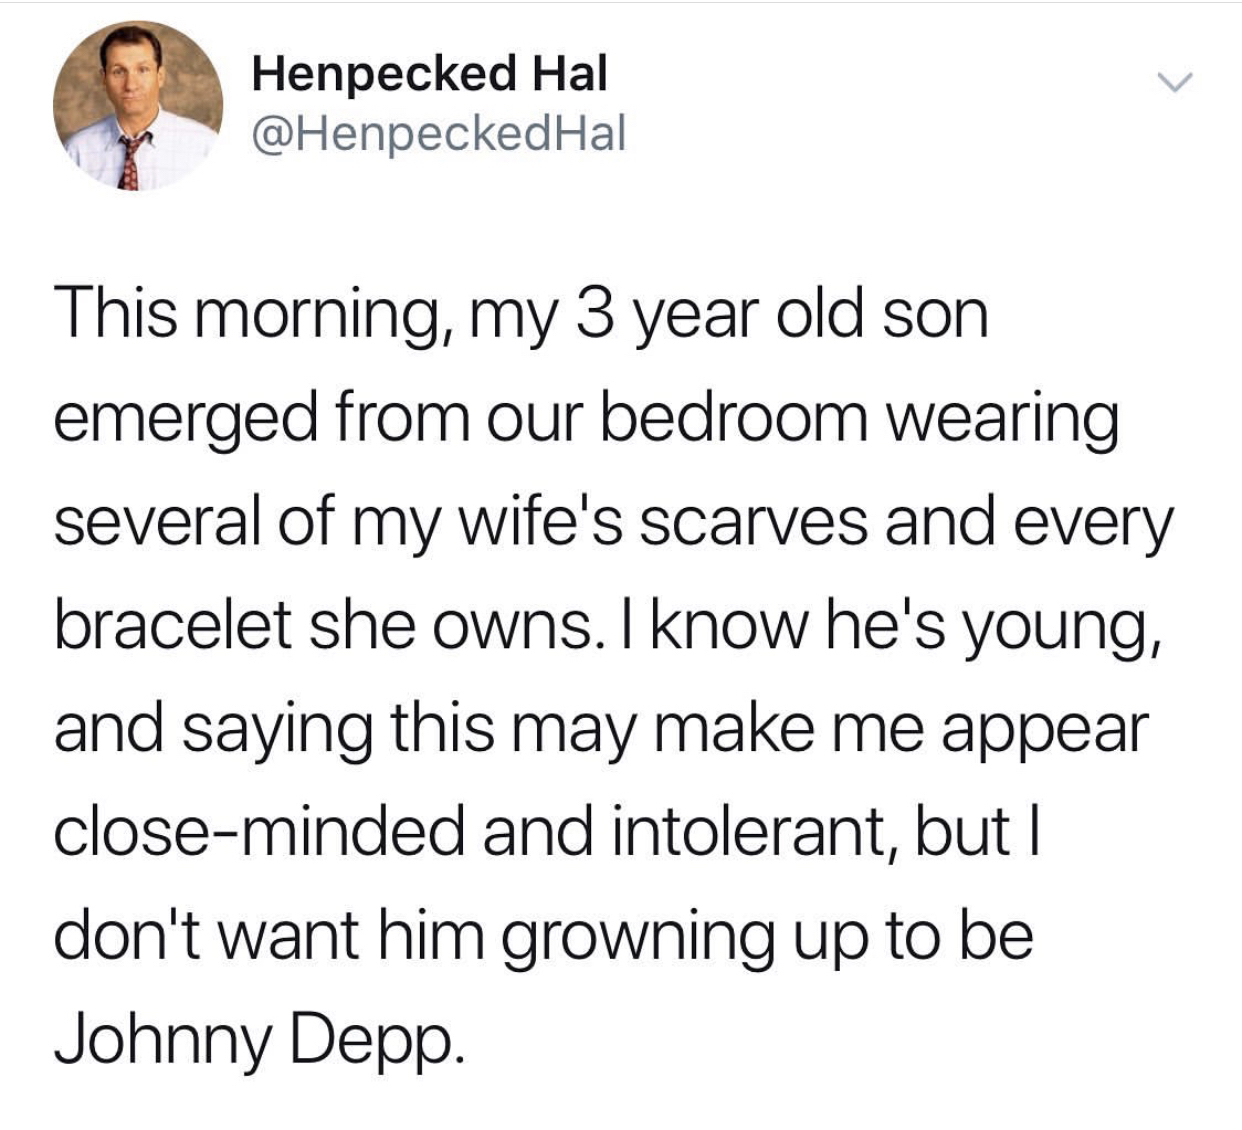 non binary tweets - Henpecked Hal This morning, my 3 year old son emerged from our bedroom wearing several of my wife's scarves and every bracelet she owns. I know he's young, and saying this may make me appear closeminded and intolerant, but I don't want